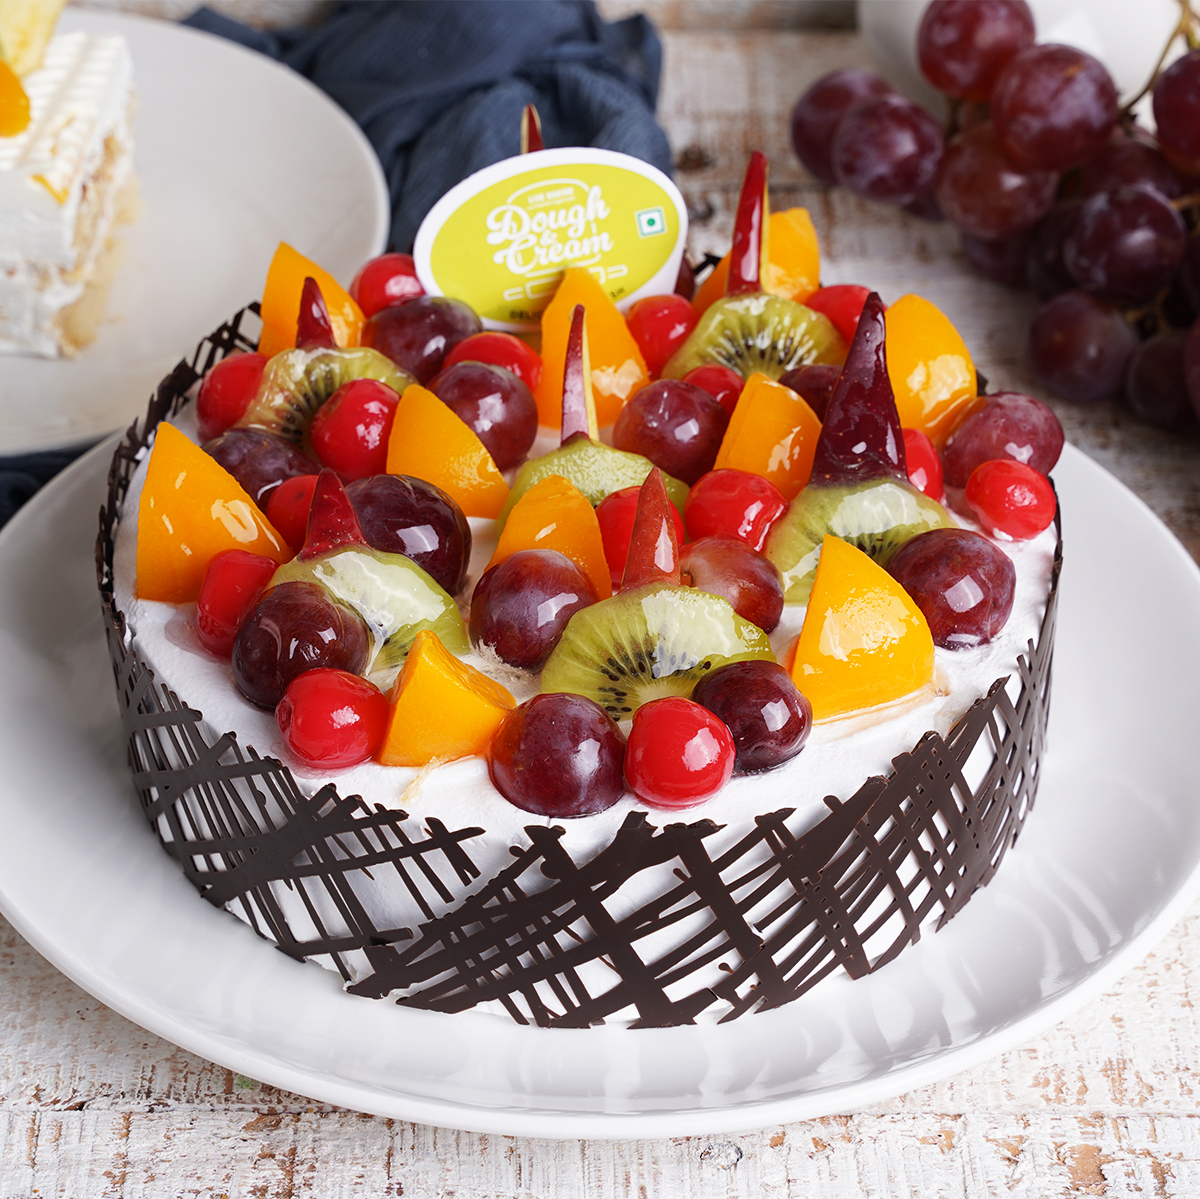 An Incredible Assortment of Fruit Cake Images in Stunning 4K Quality – Over 999 to Choose From!